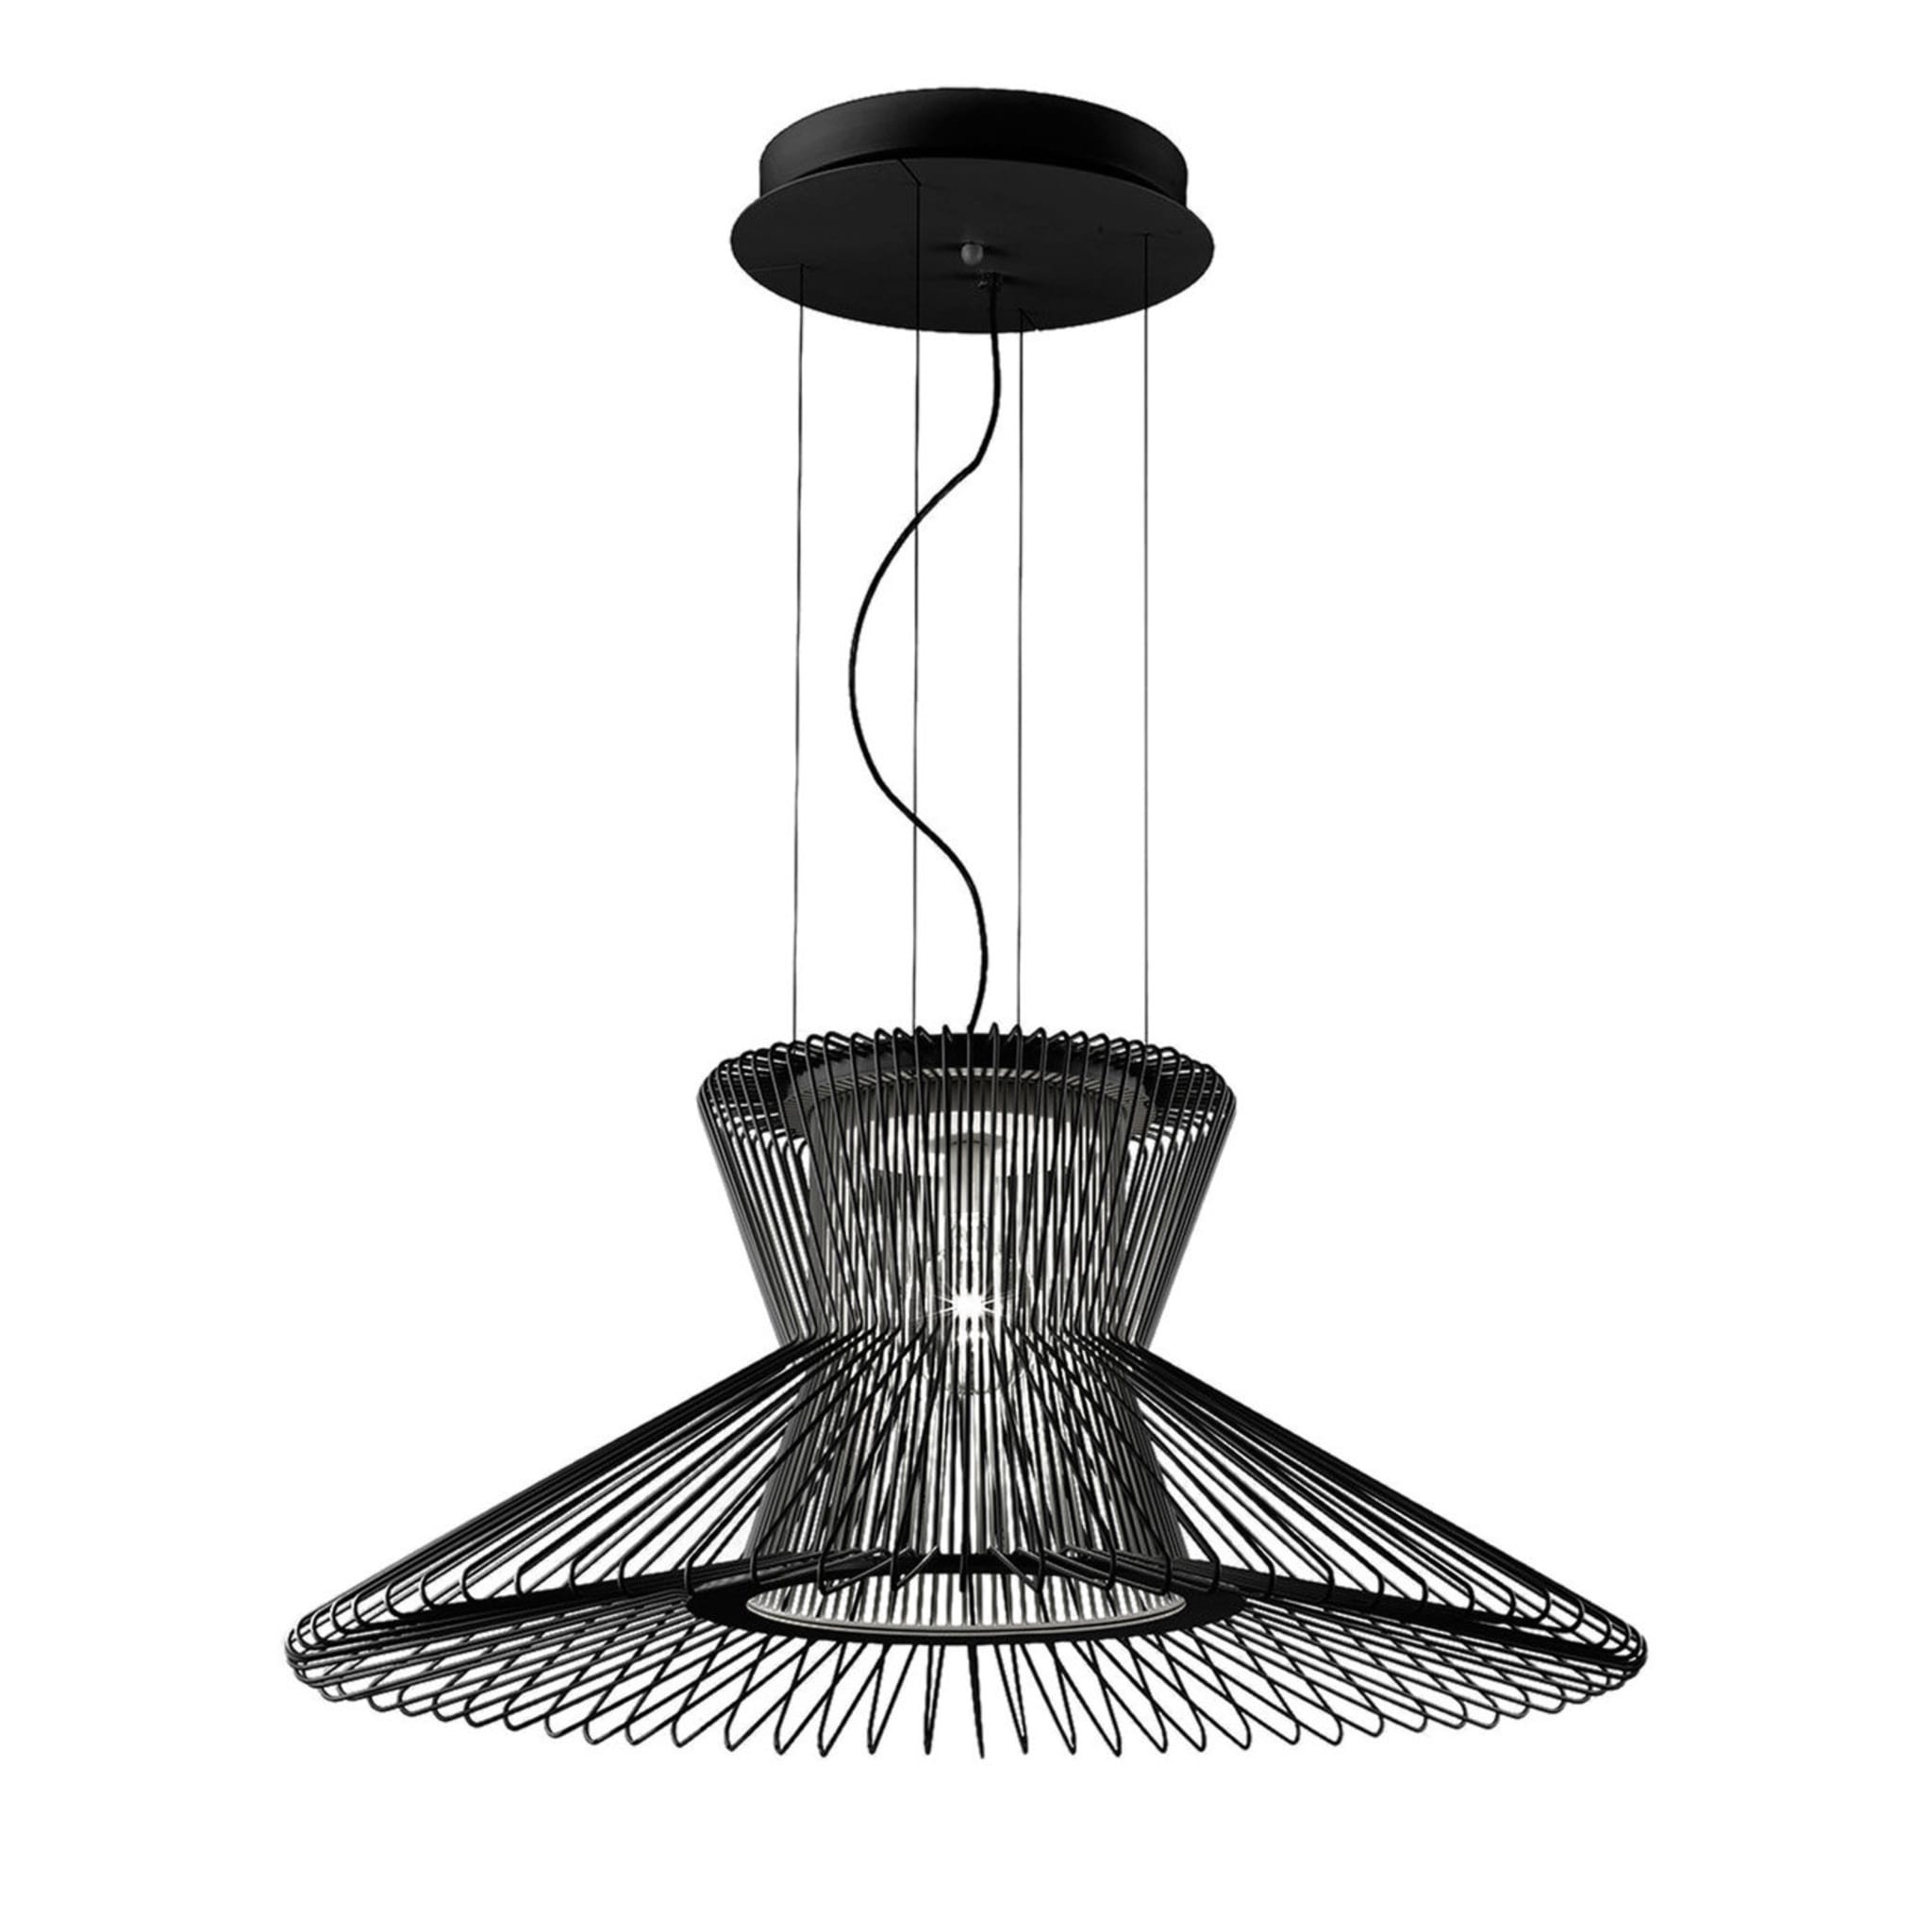 Impossible B Ø 105 Black Pendant Lamp by Massimo Mussapi - Main view